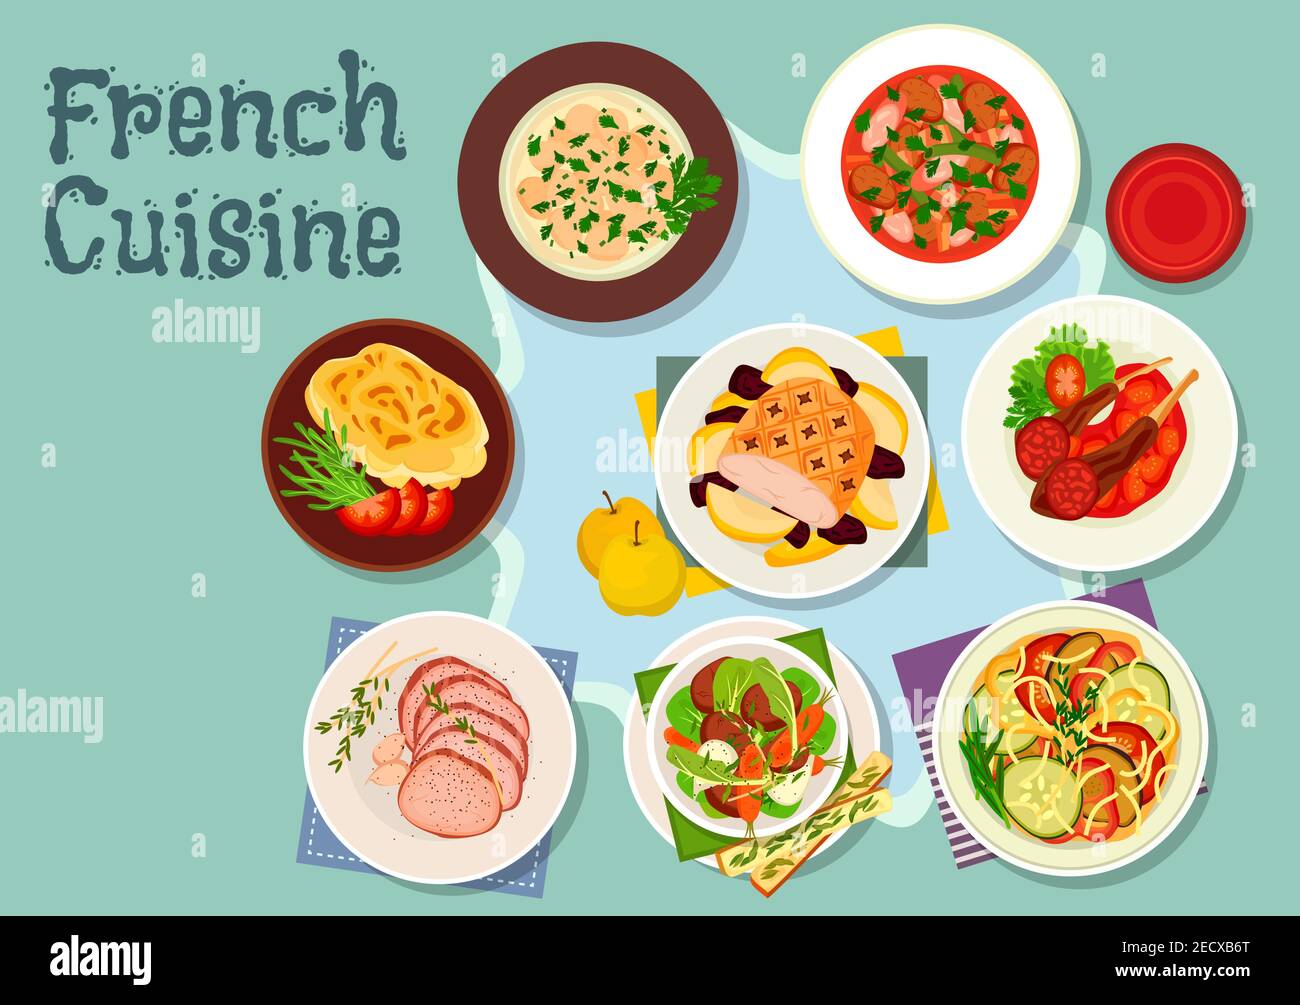 French cuisine icon with vegetable stew ratatouille, lamb ribs, potato cheese casserole, lamb stew with bacon, chateaubriand steak, beef stew, baked p Stock Vector